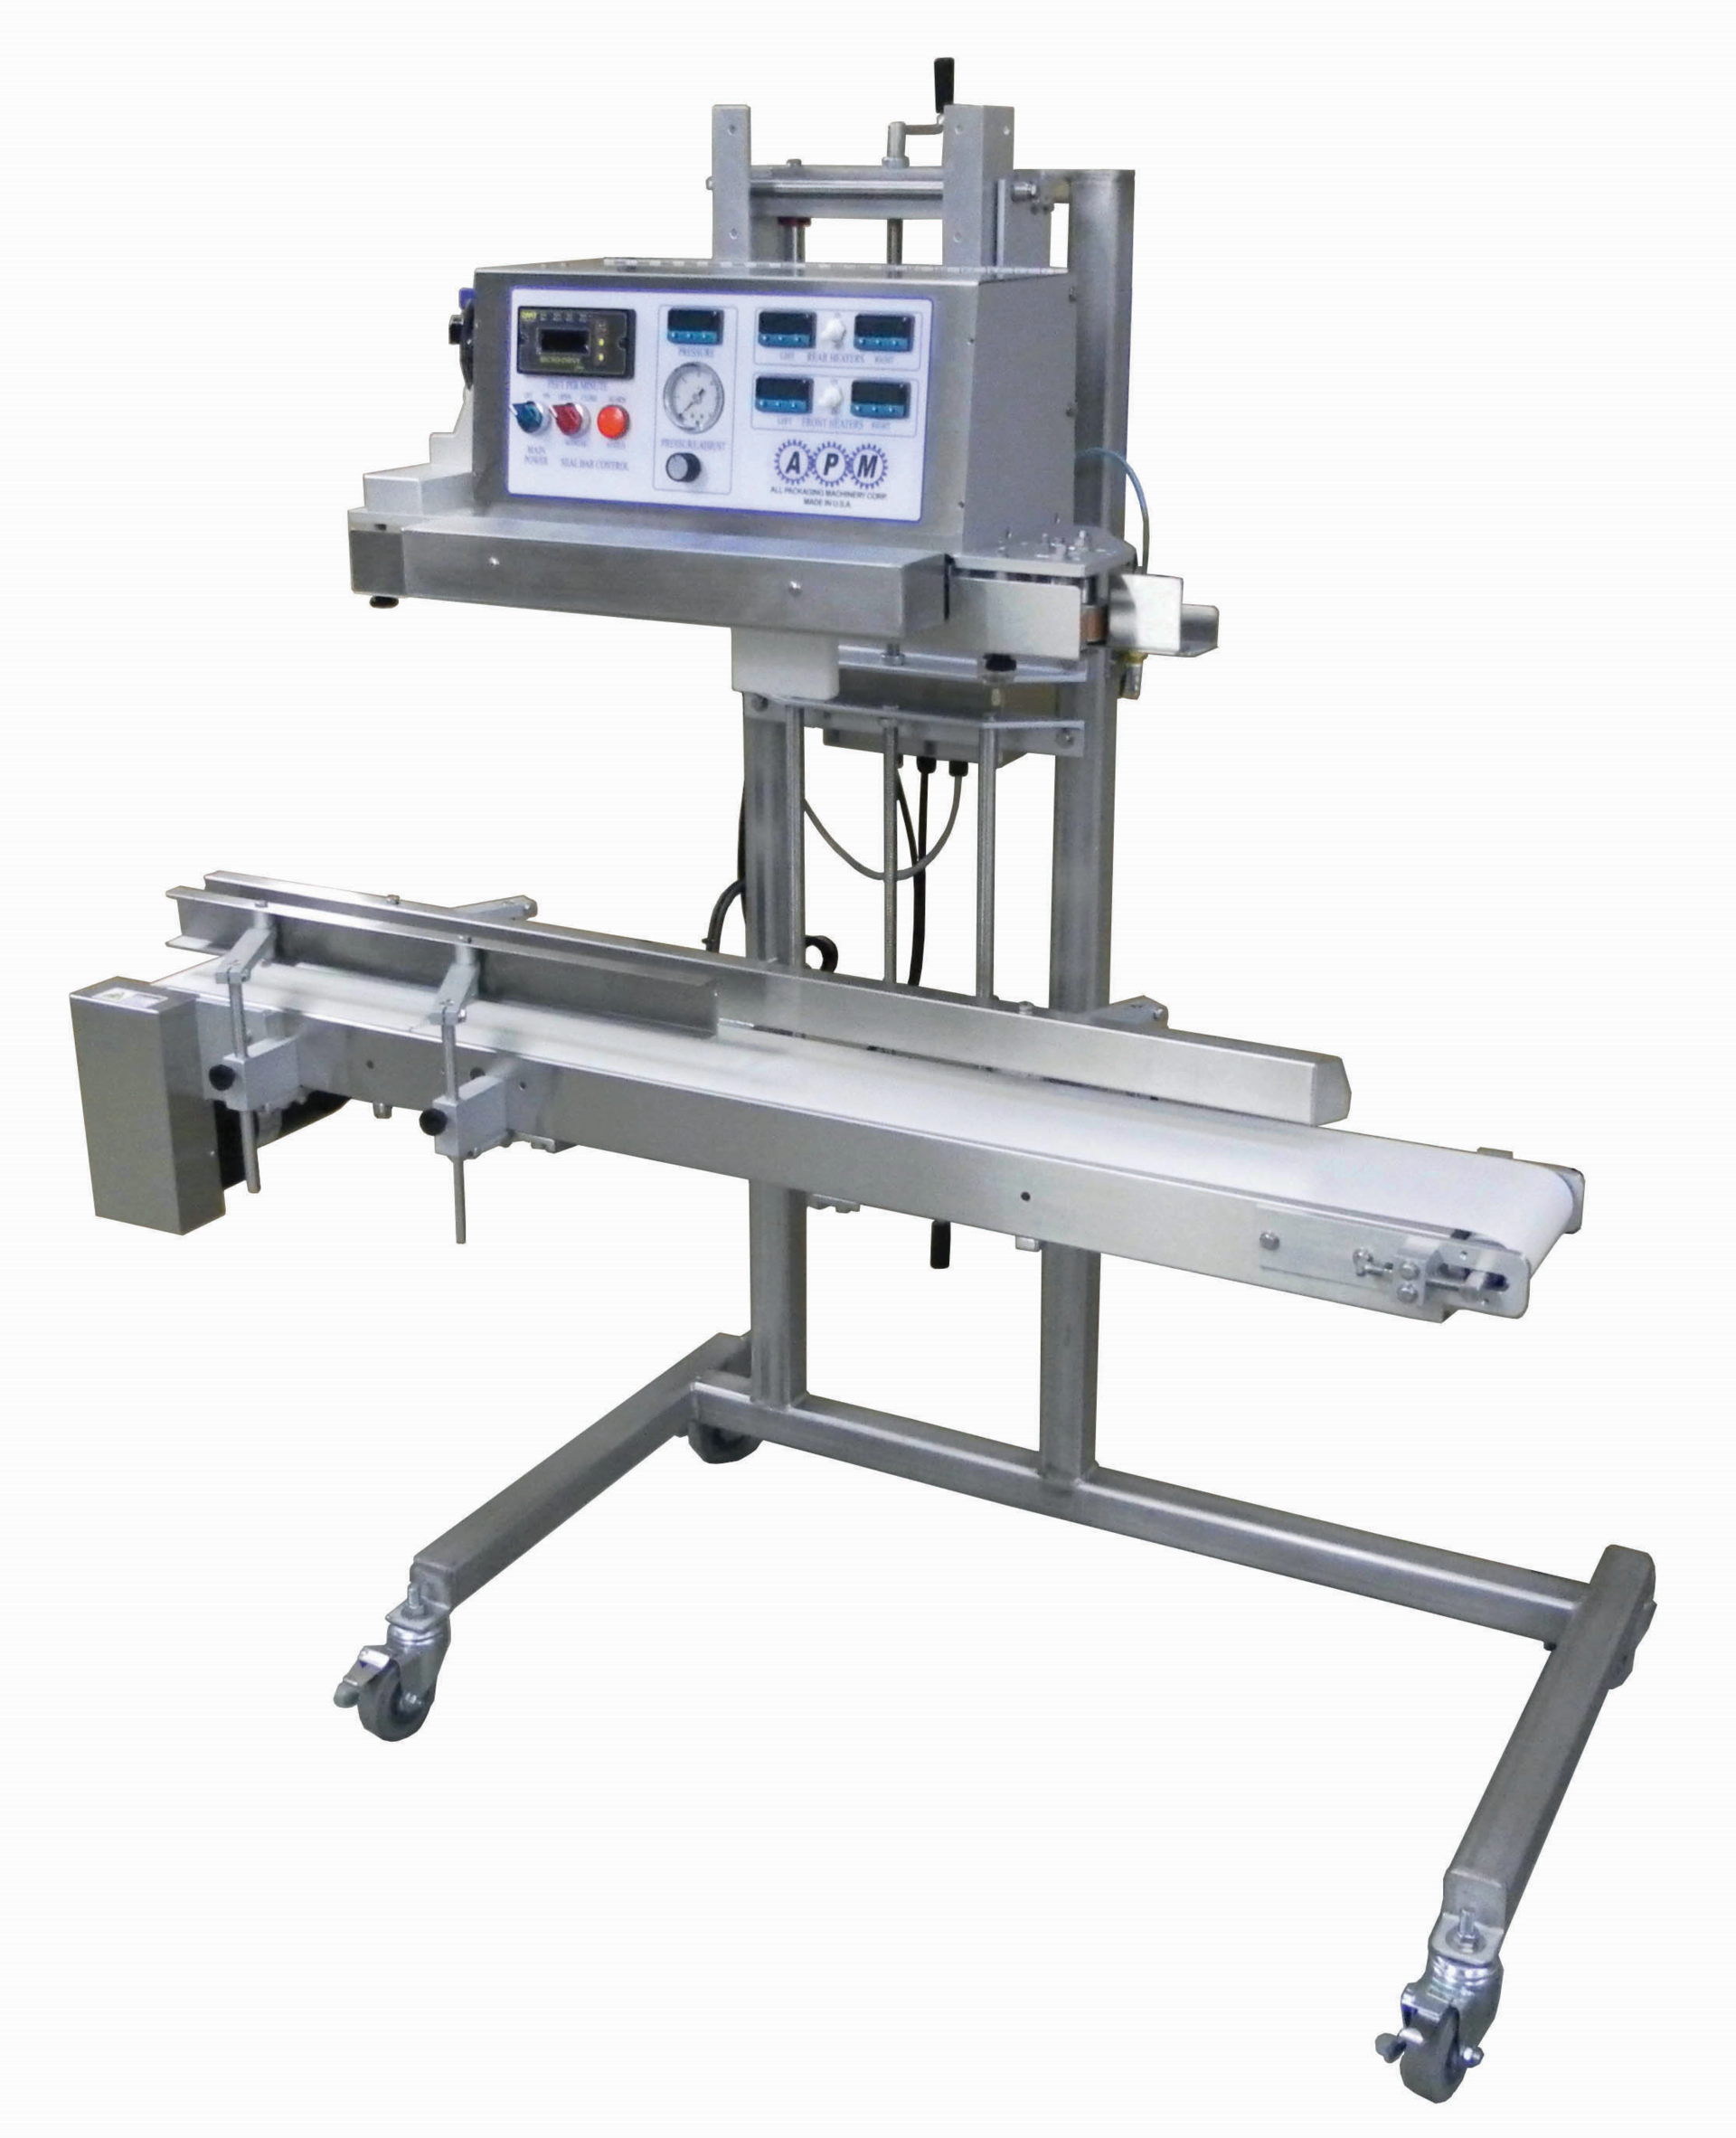 all packaging machinery